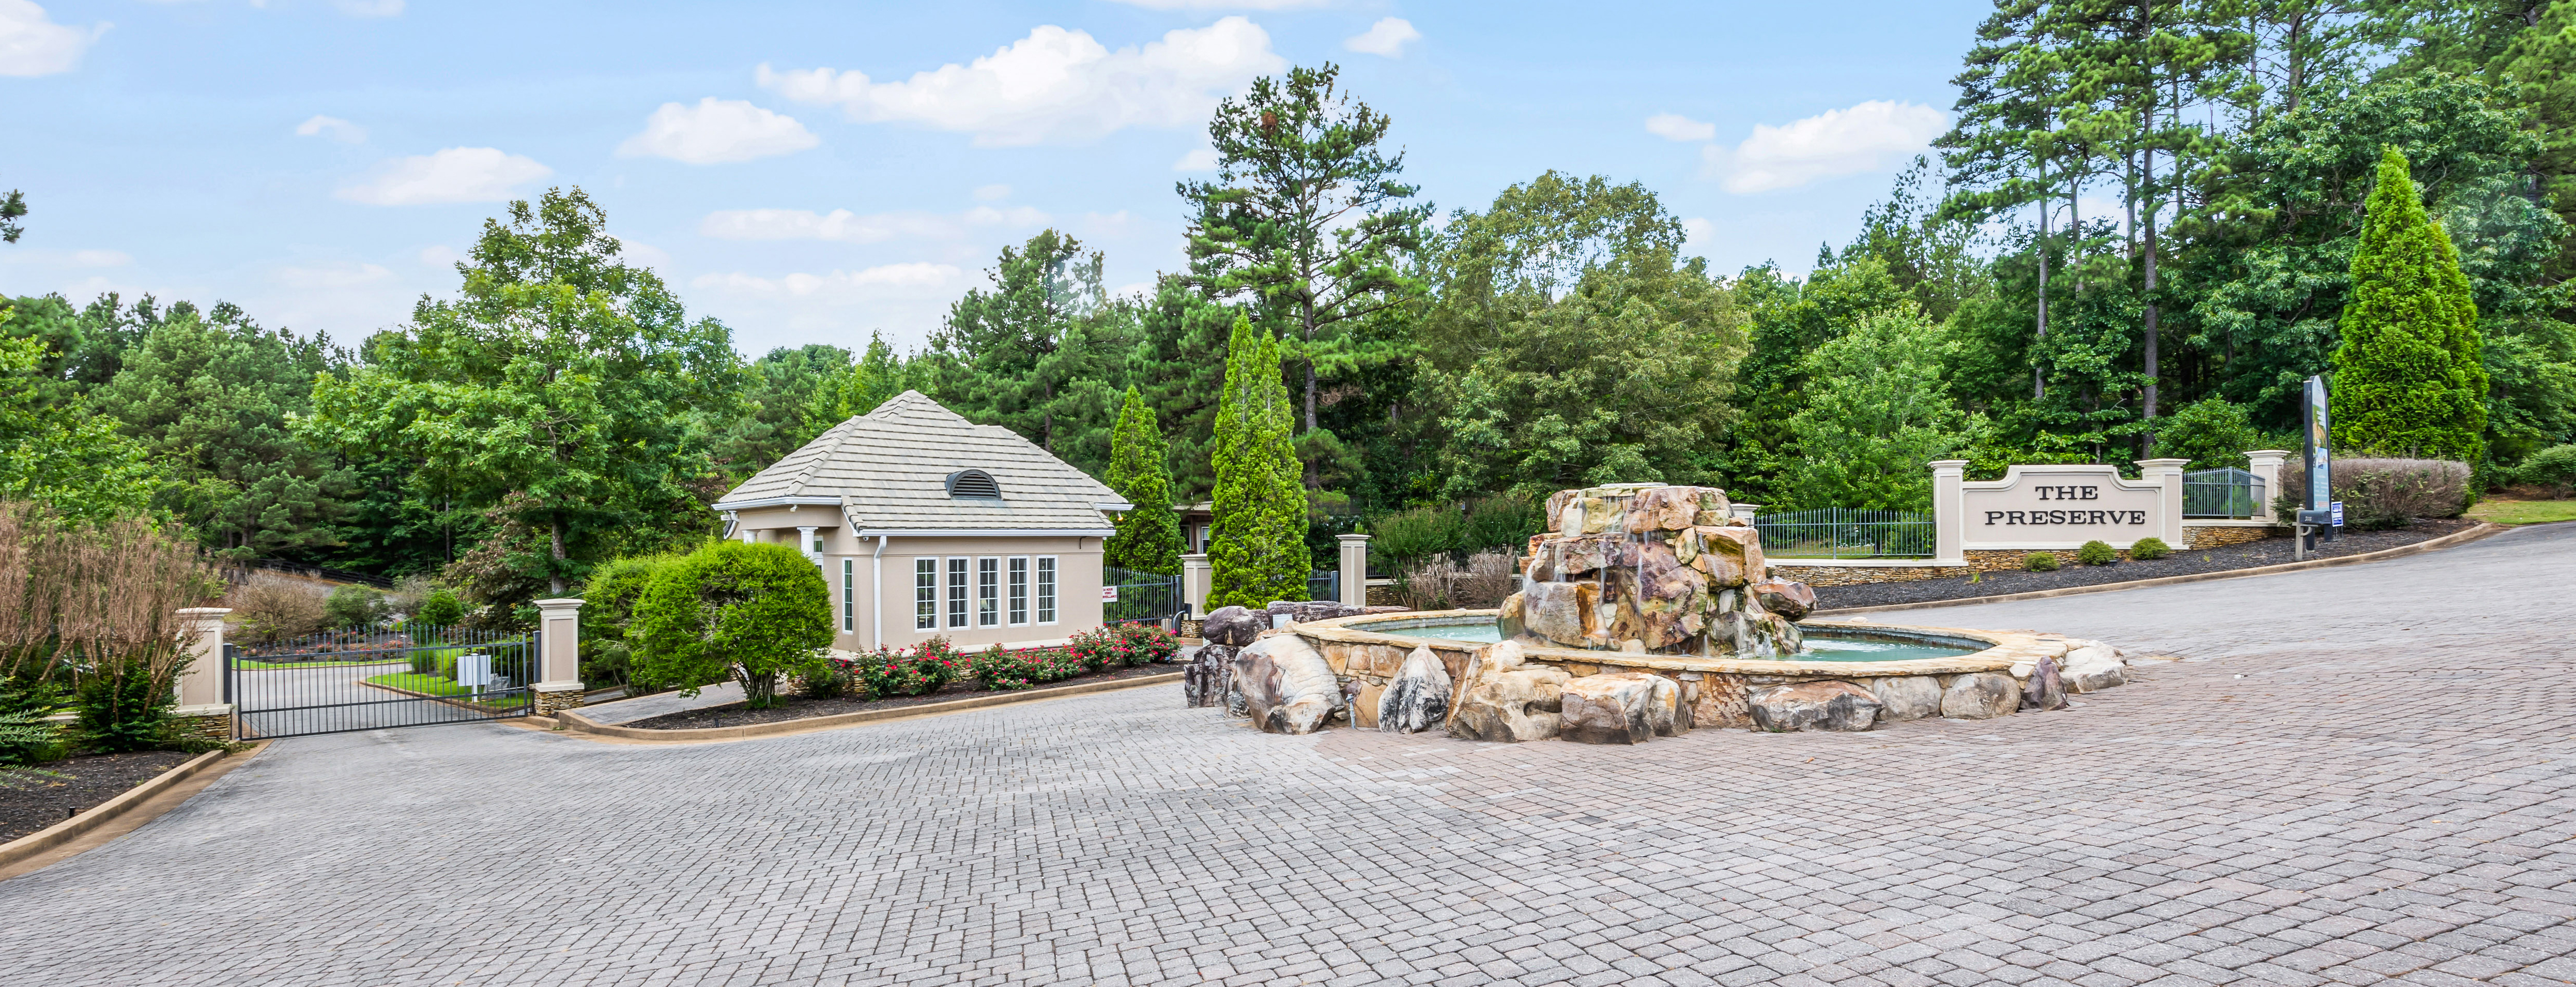 Beautifully Landscaped Secure Gated Entrance with Brick Paver Entry, a Waterfall Feature, and Guard House Awaits at The Preserve at Pickwick Lake